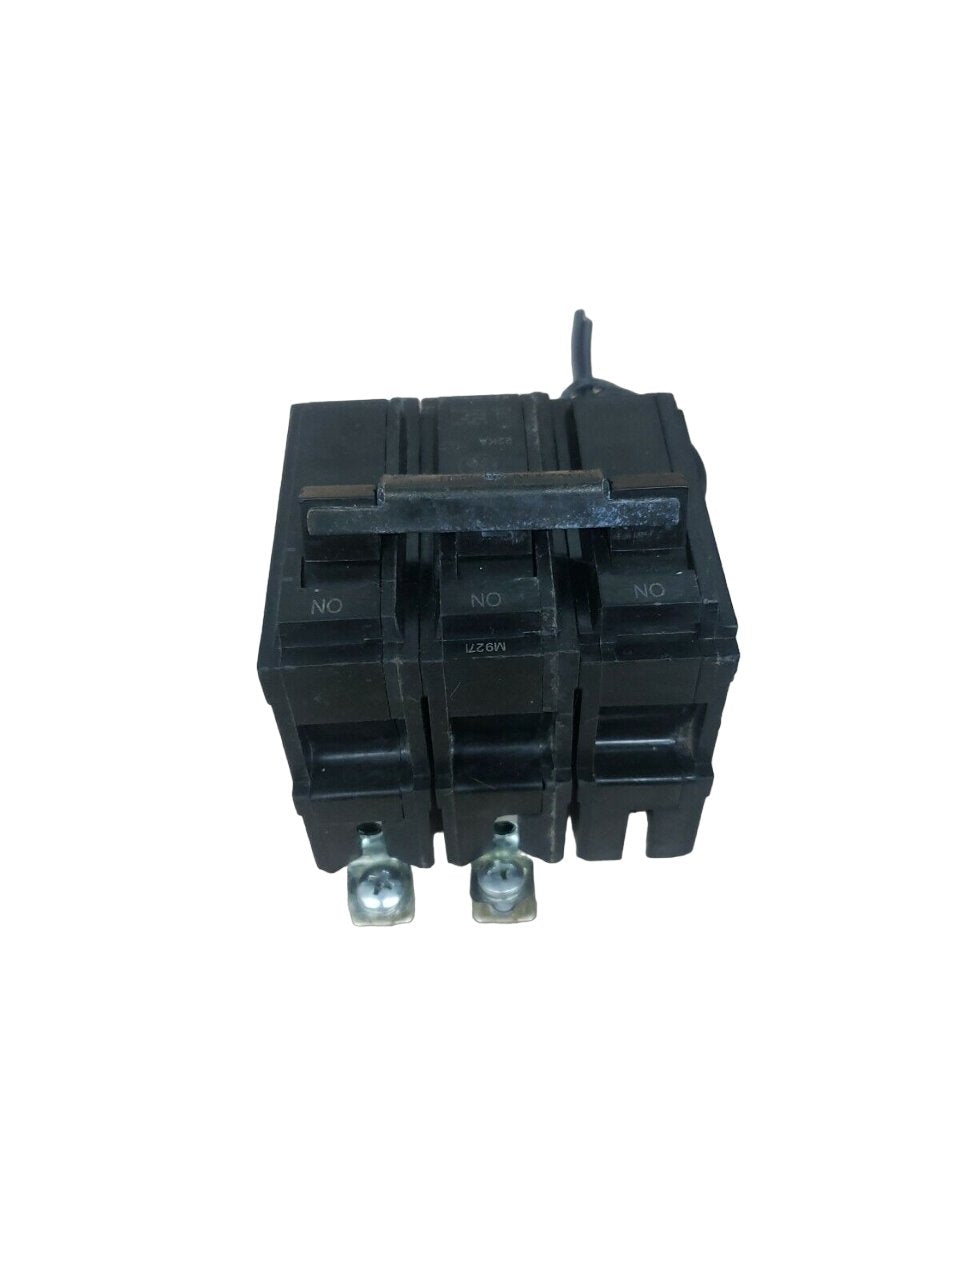 THHQB2140ST1 - General Electrics - Molded Case Circuit Breakers